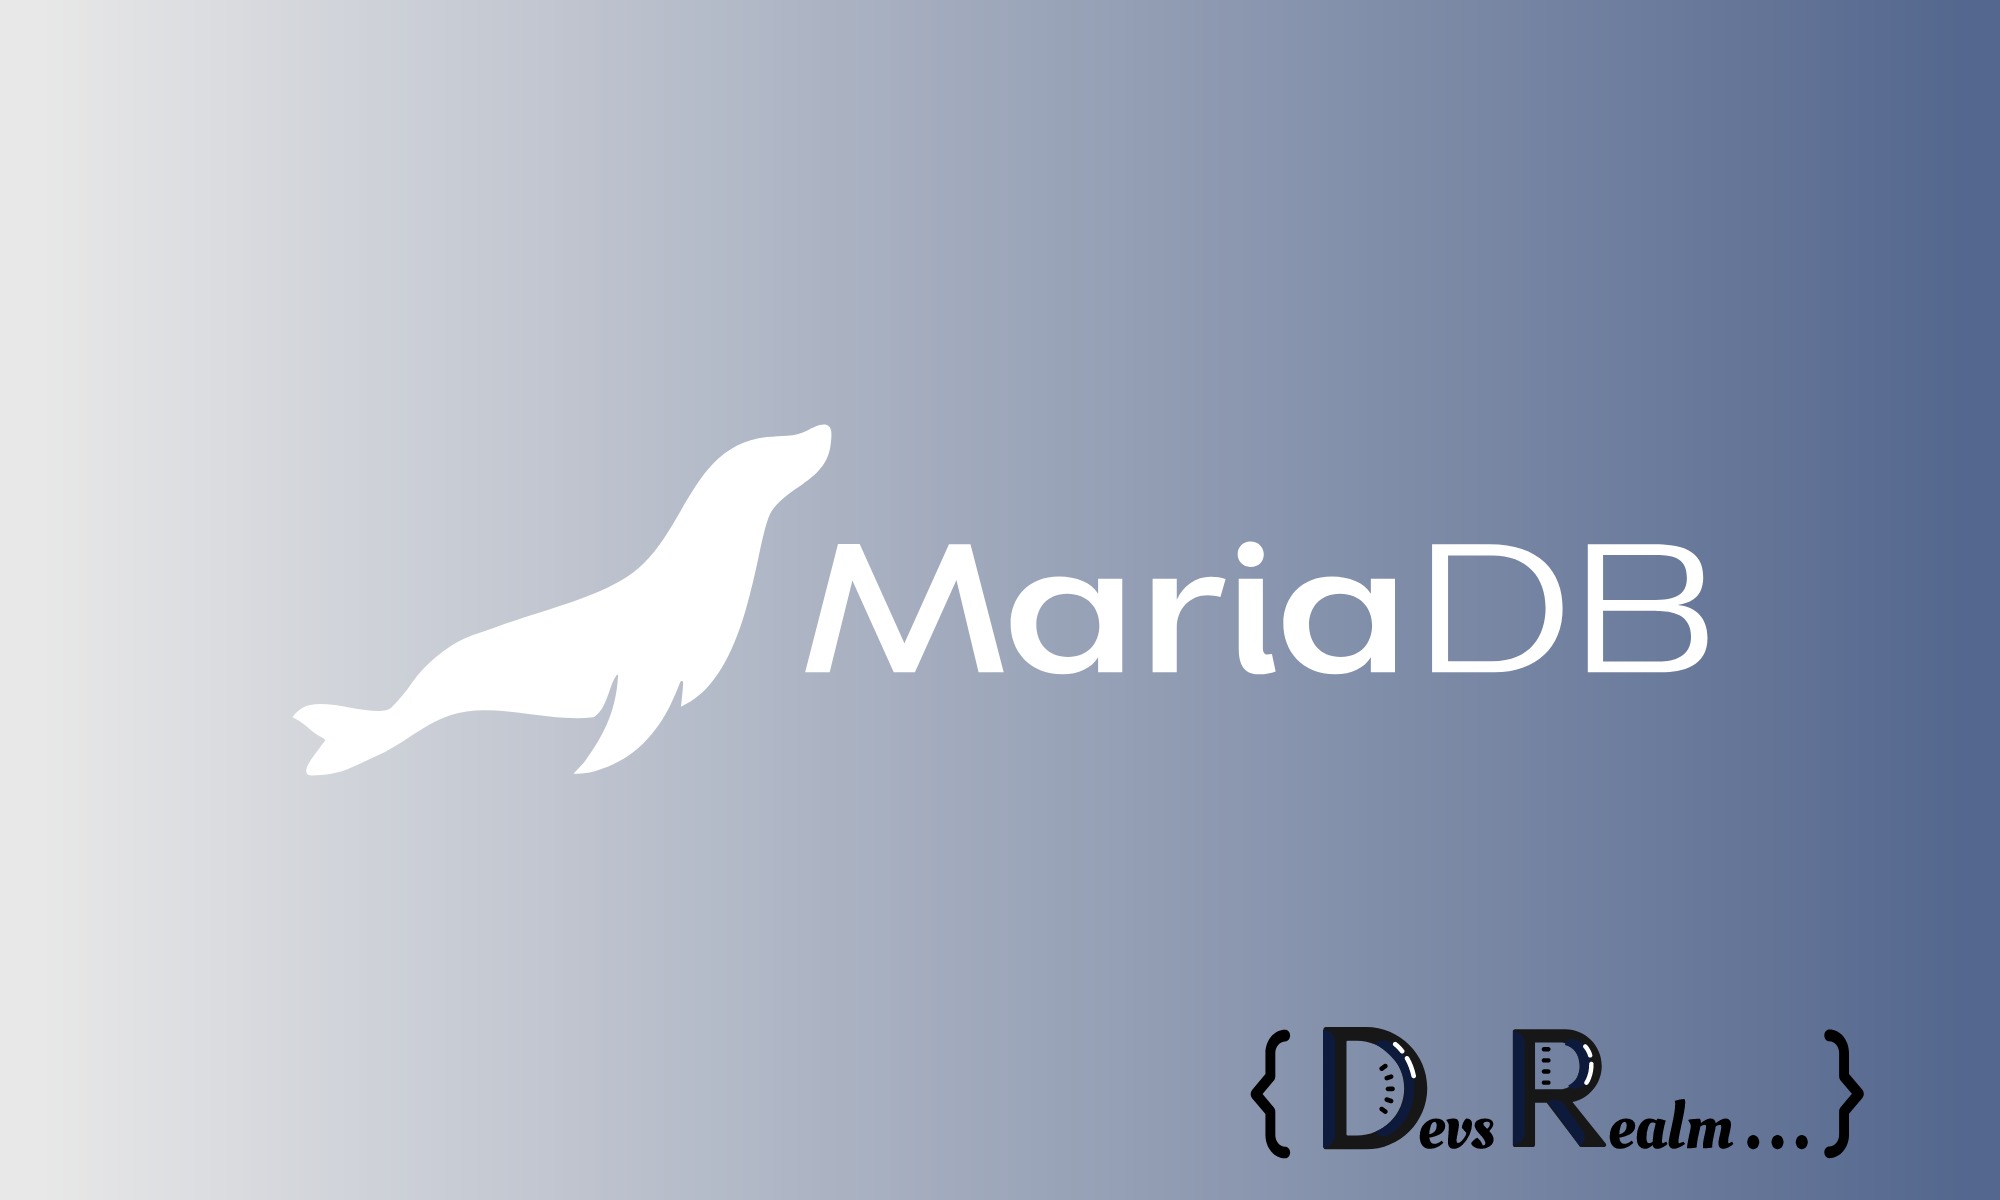 Guide To Selecting Data In MariaDB